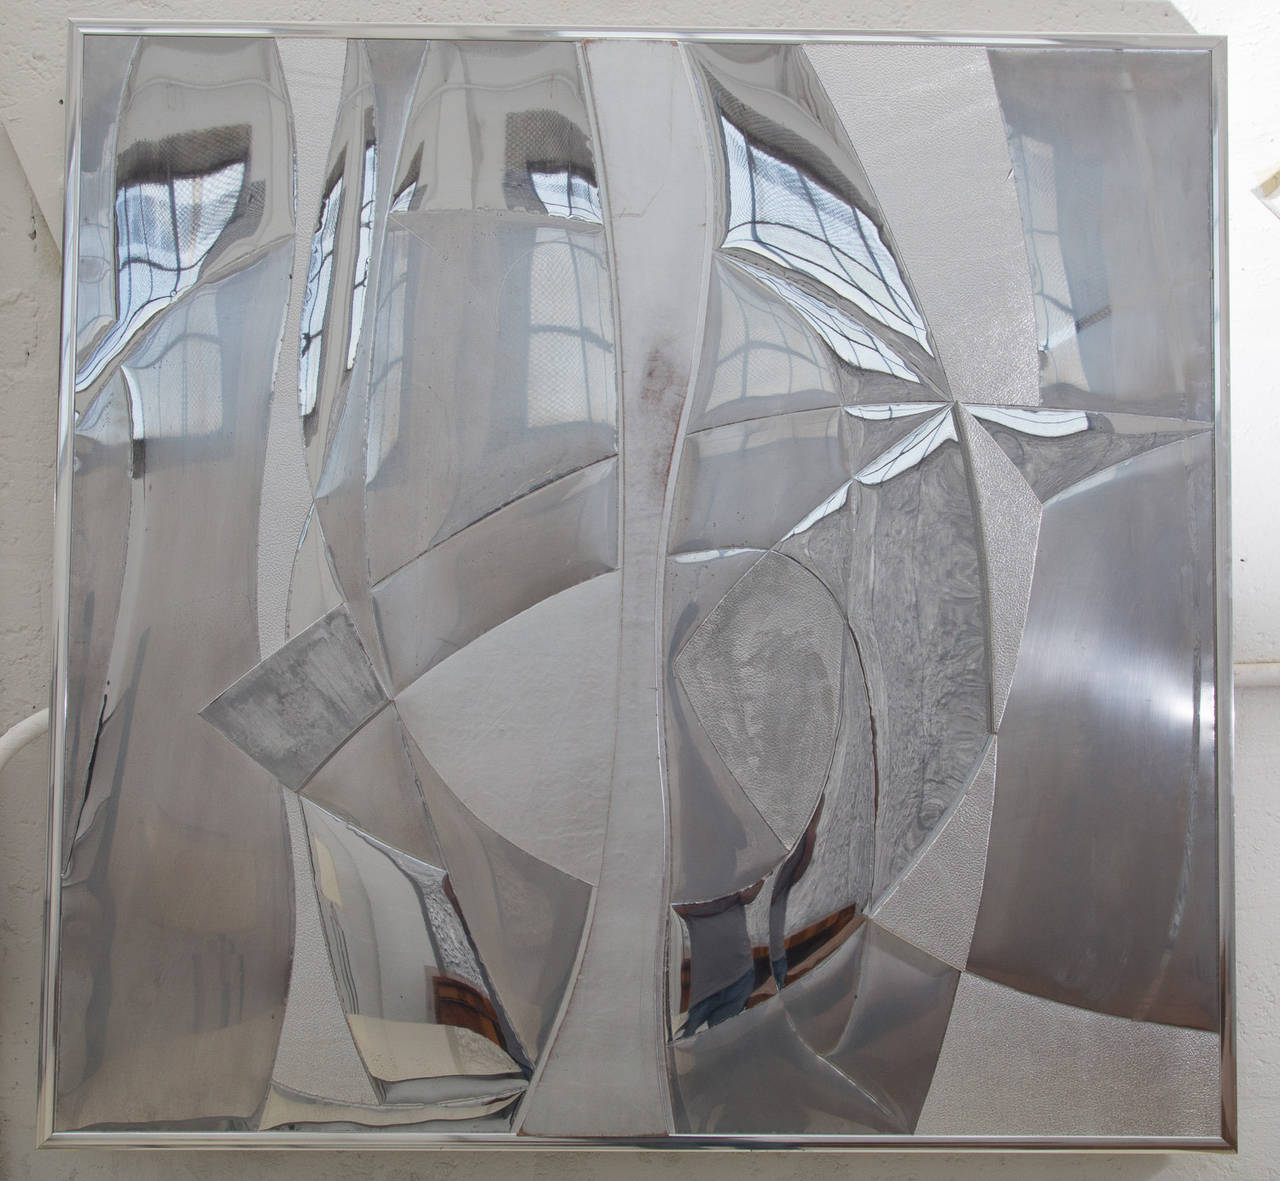 Wall sculpture with exquisite detail executed in
mirror finished steel panels, polished aluminum 
and 2